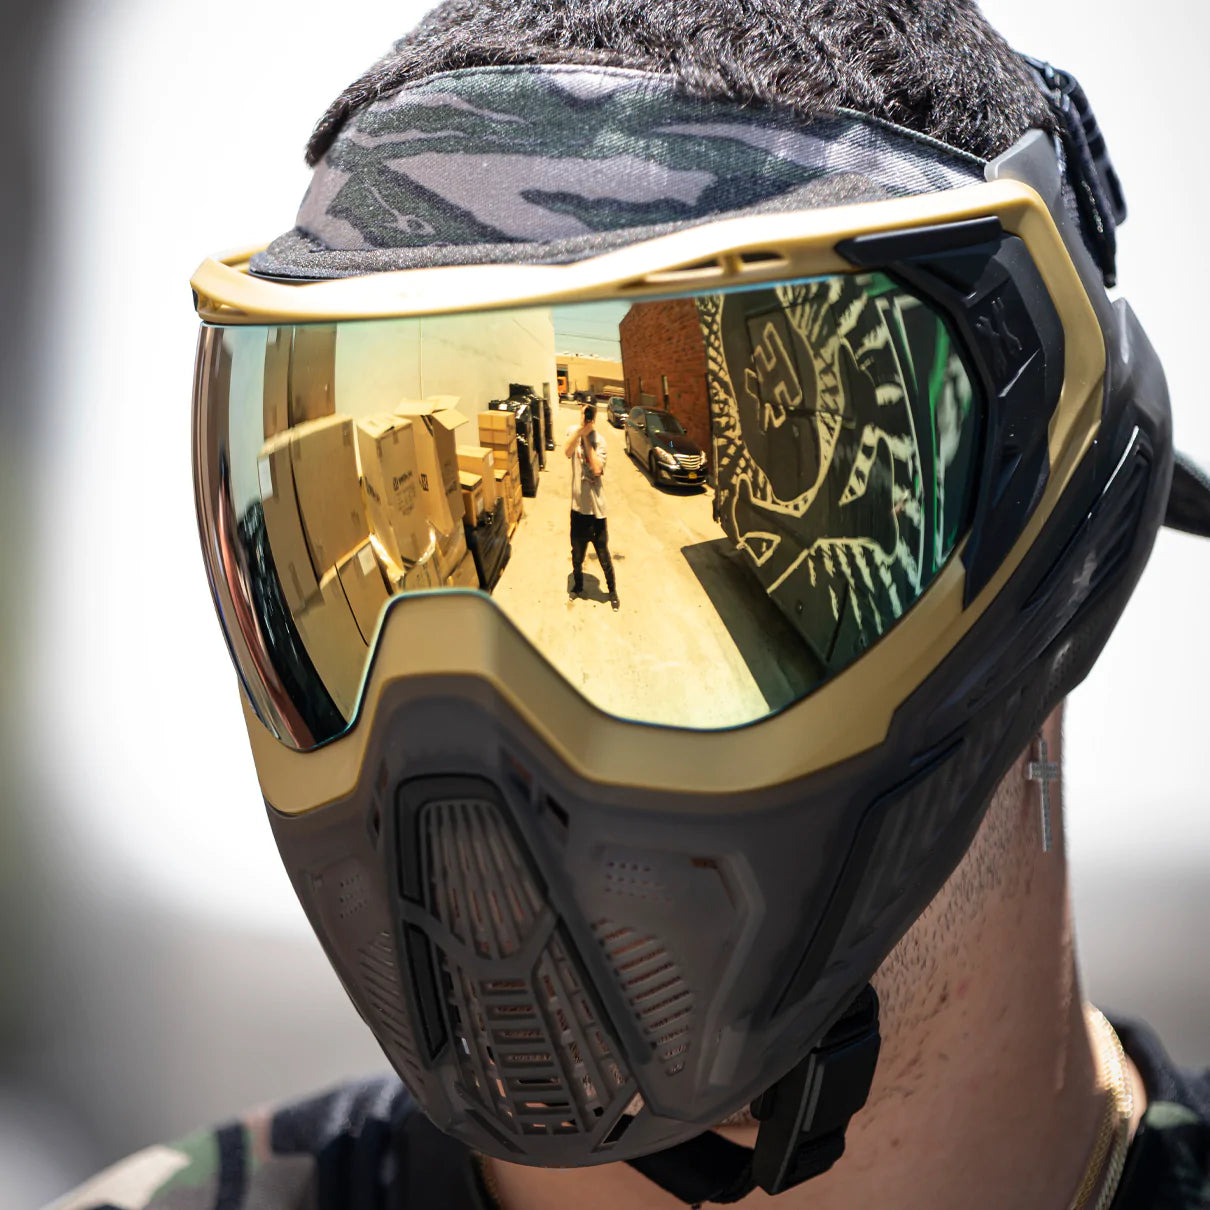 Slr Goggle - Alloy (Gold/Black/Smoke) Gold Lens | Paintball Goggle | Mask | Hk Army